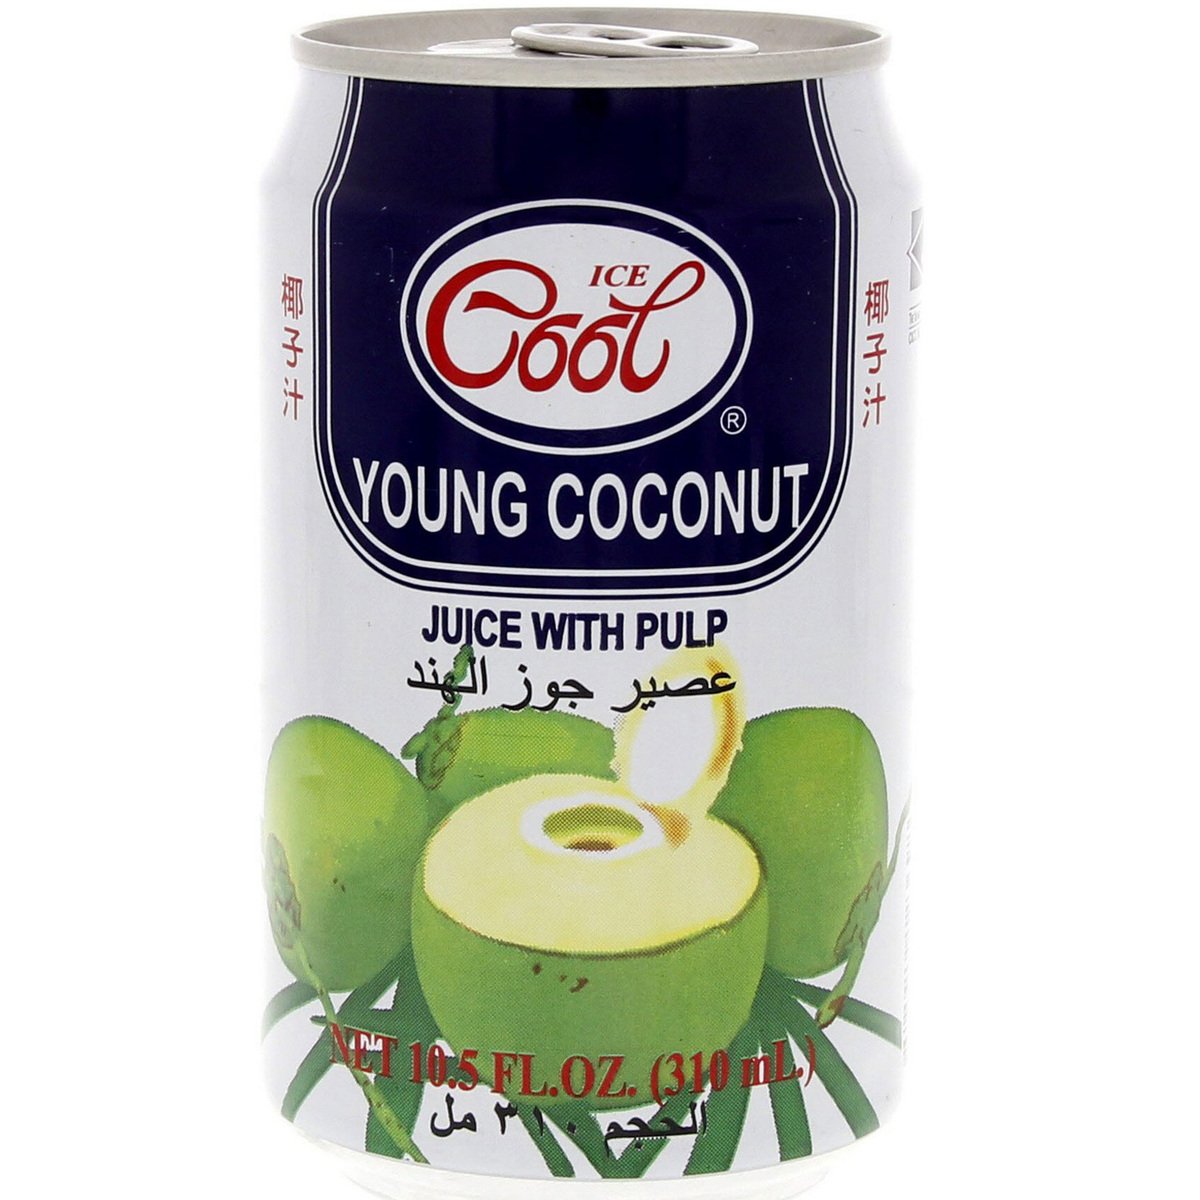 Ice Cool Young Coconut Juice With Pulp 6 x 310 ml